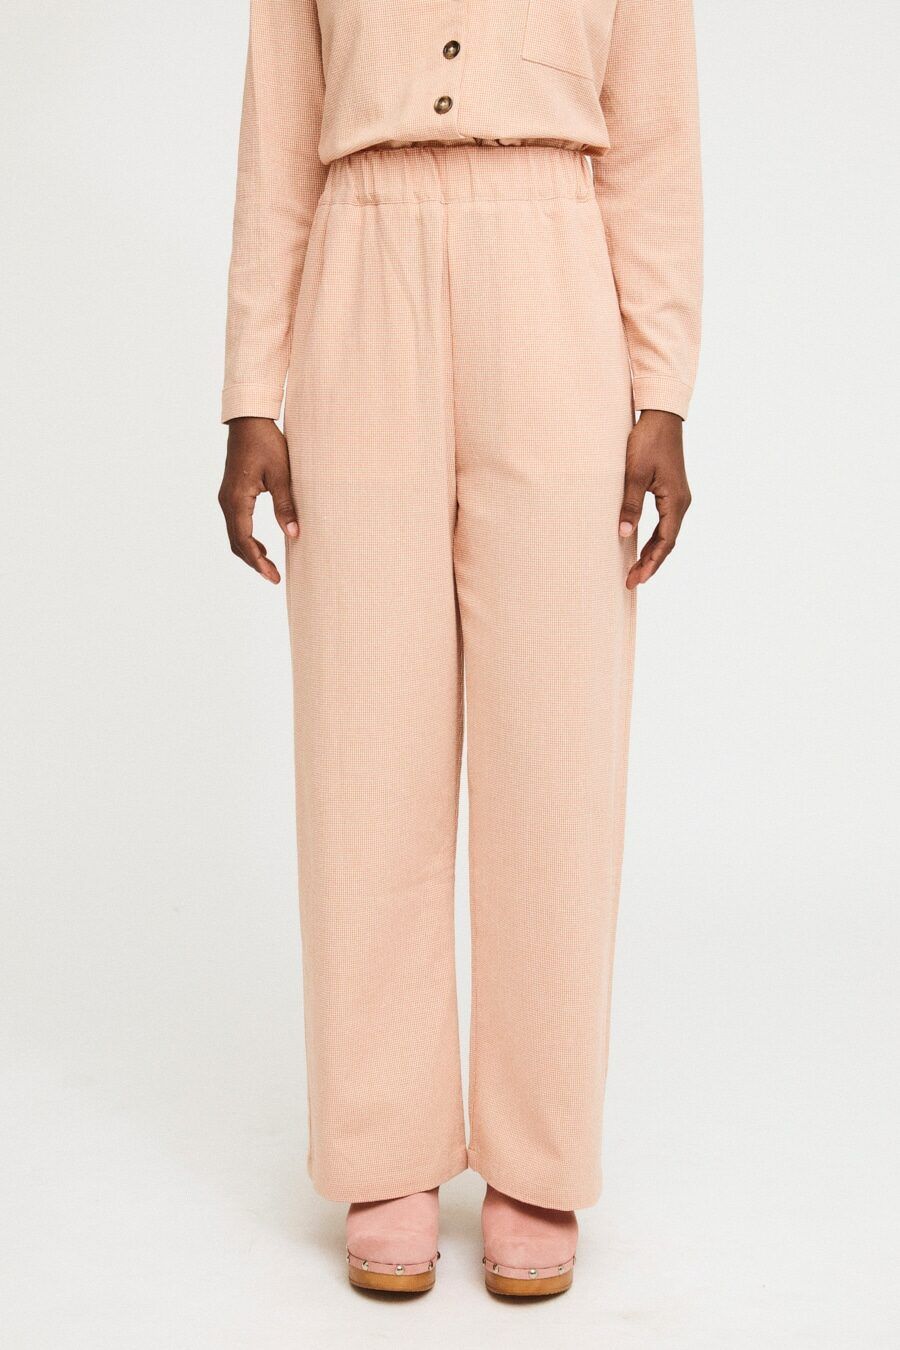 Product Image for Marianne Pants, Peach